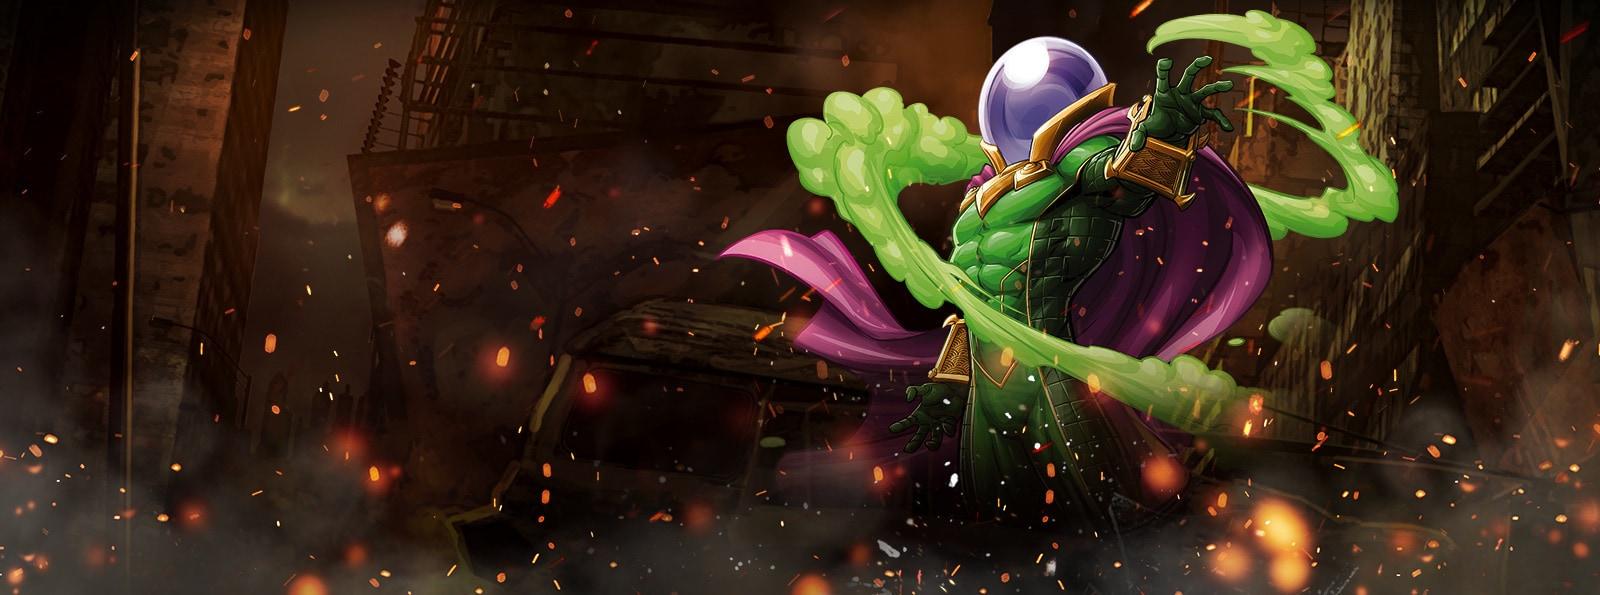 Mysterio. Spider Man Characters